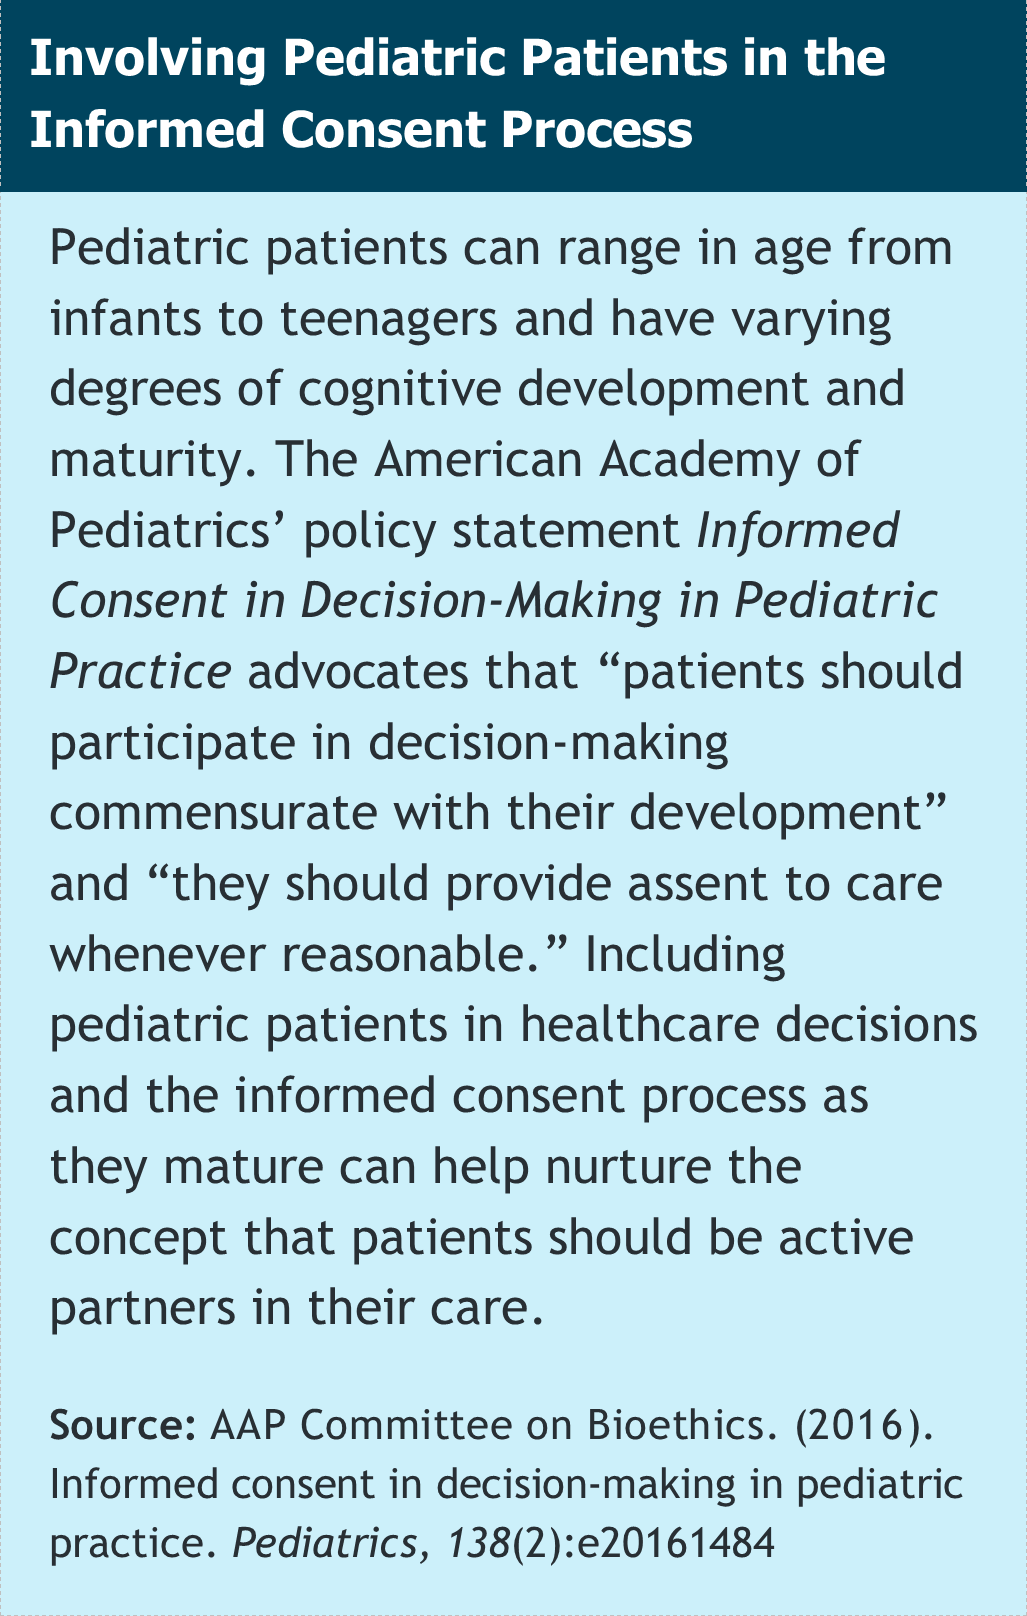 Informed Consent for Pediatric Patients